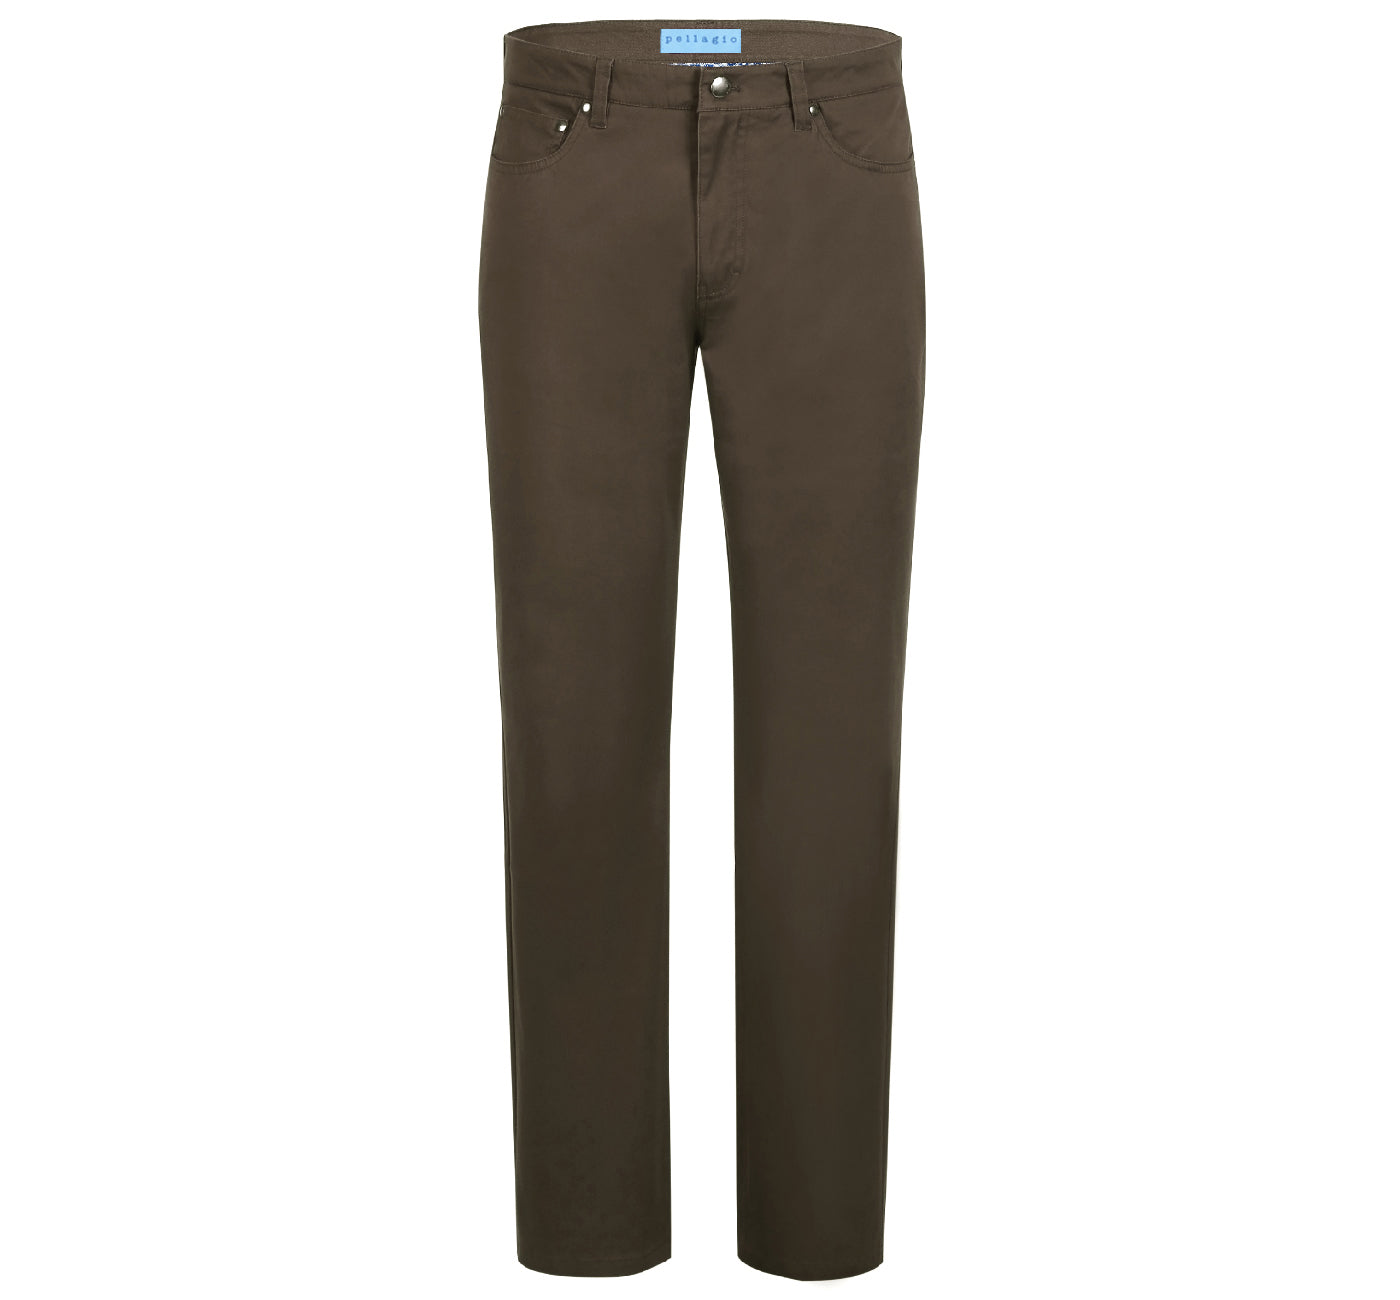 PF20-22 Men's 5-Pocket Brown Cotton Stretch Washed Flat Front Chino Pants